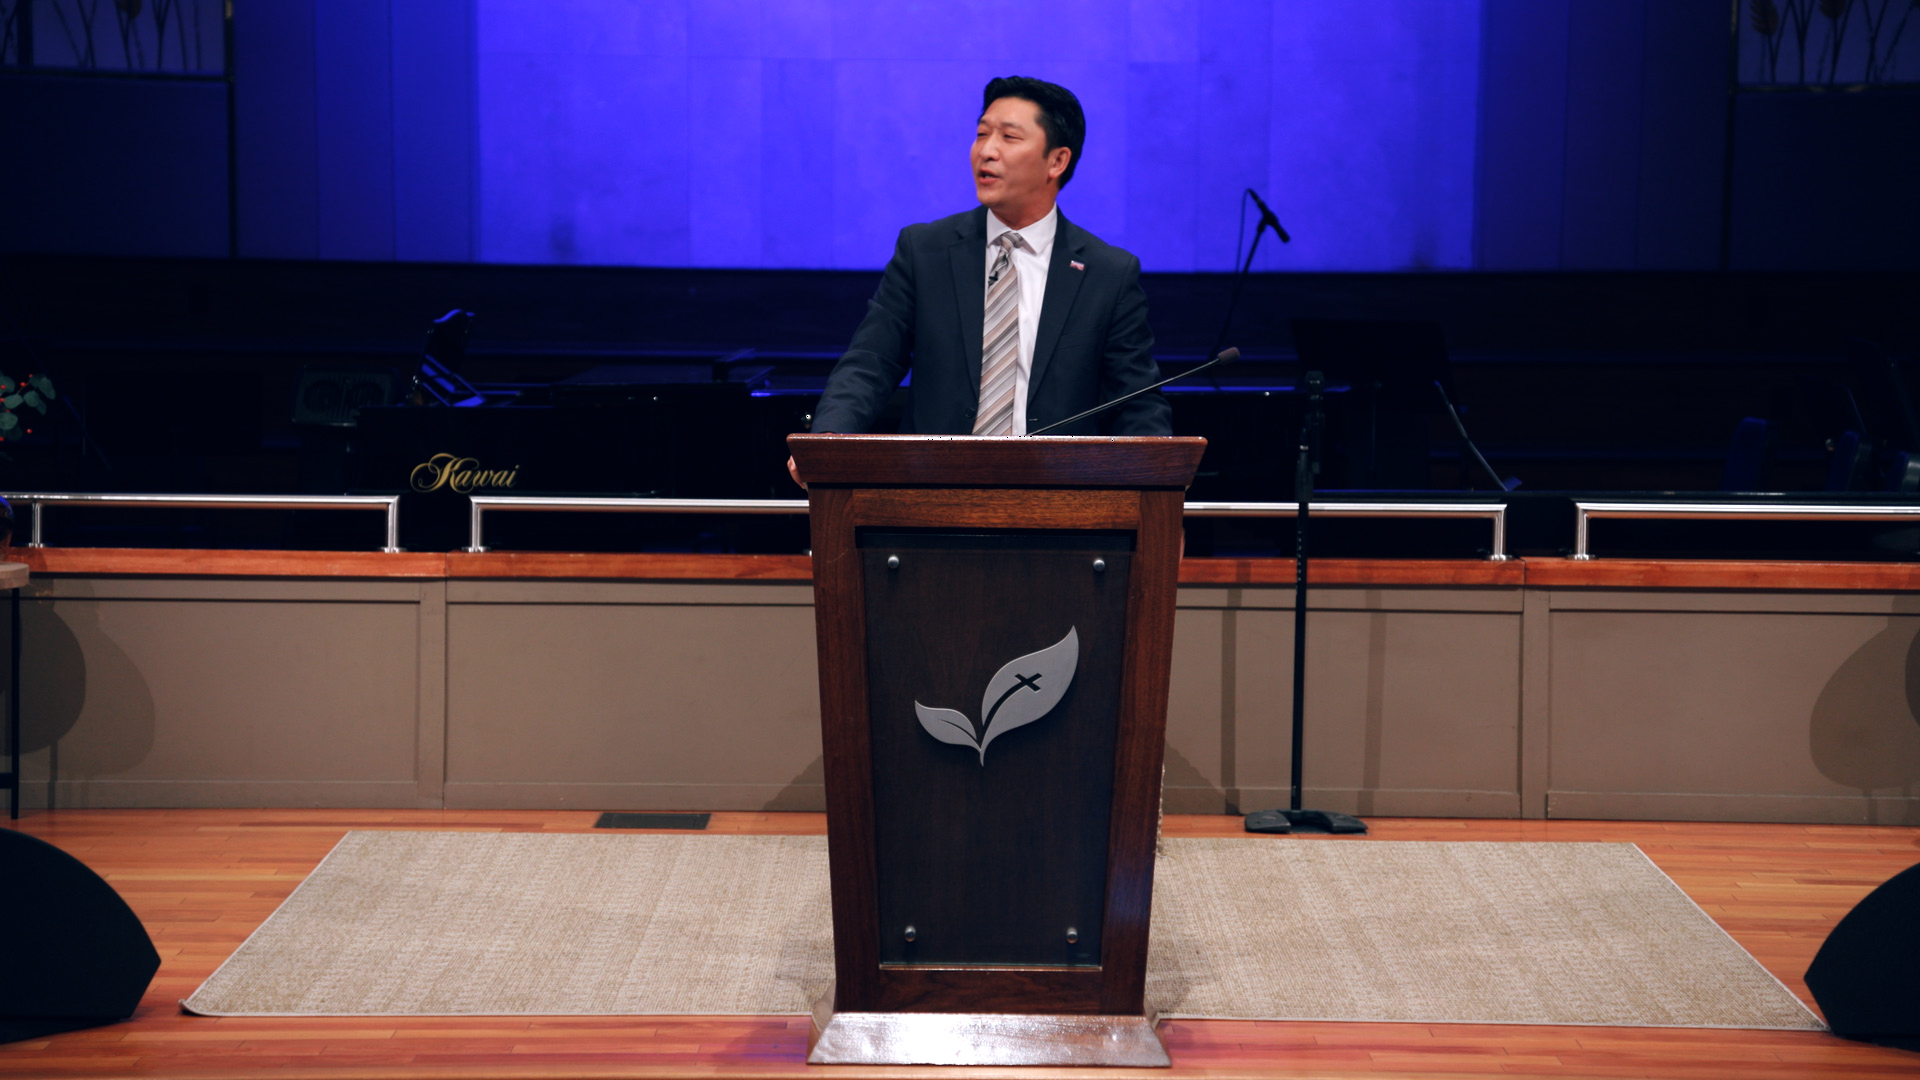 Paul Choi: Waiting on the Lord